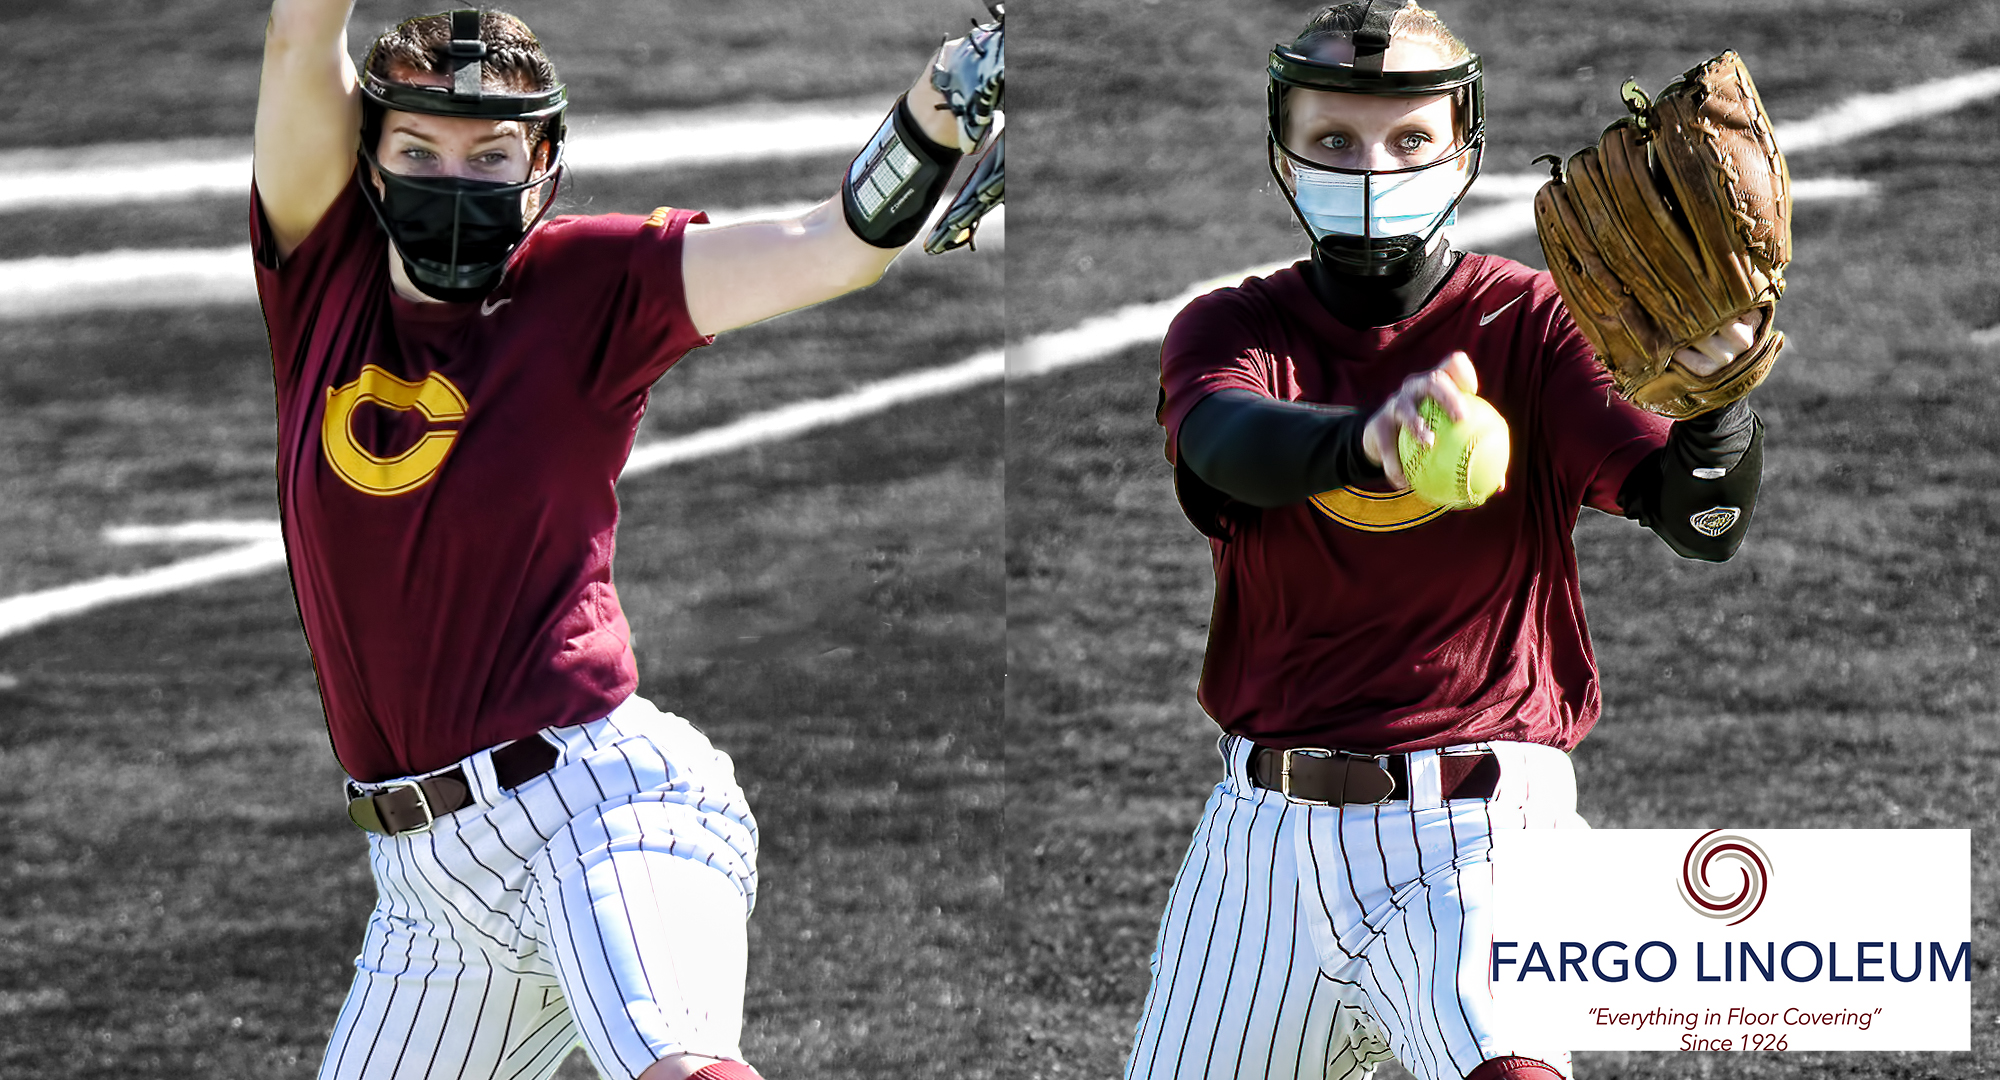 Senior Megan Gavin (L) had 17 strikeouts in Game 1 and sophomore Amber Taylor threw a complete-game shutout in Game 2 of the Cobbers' home opener against Minn.-Crookston.